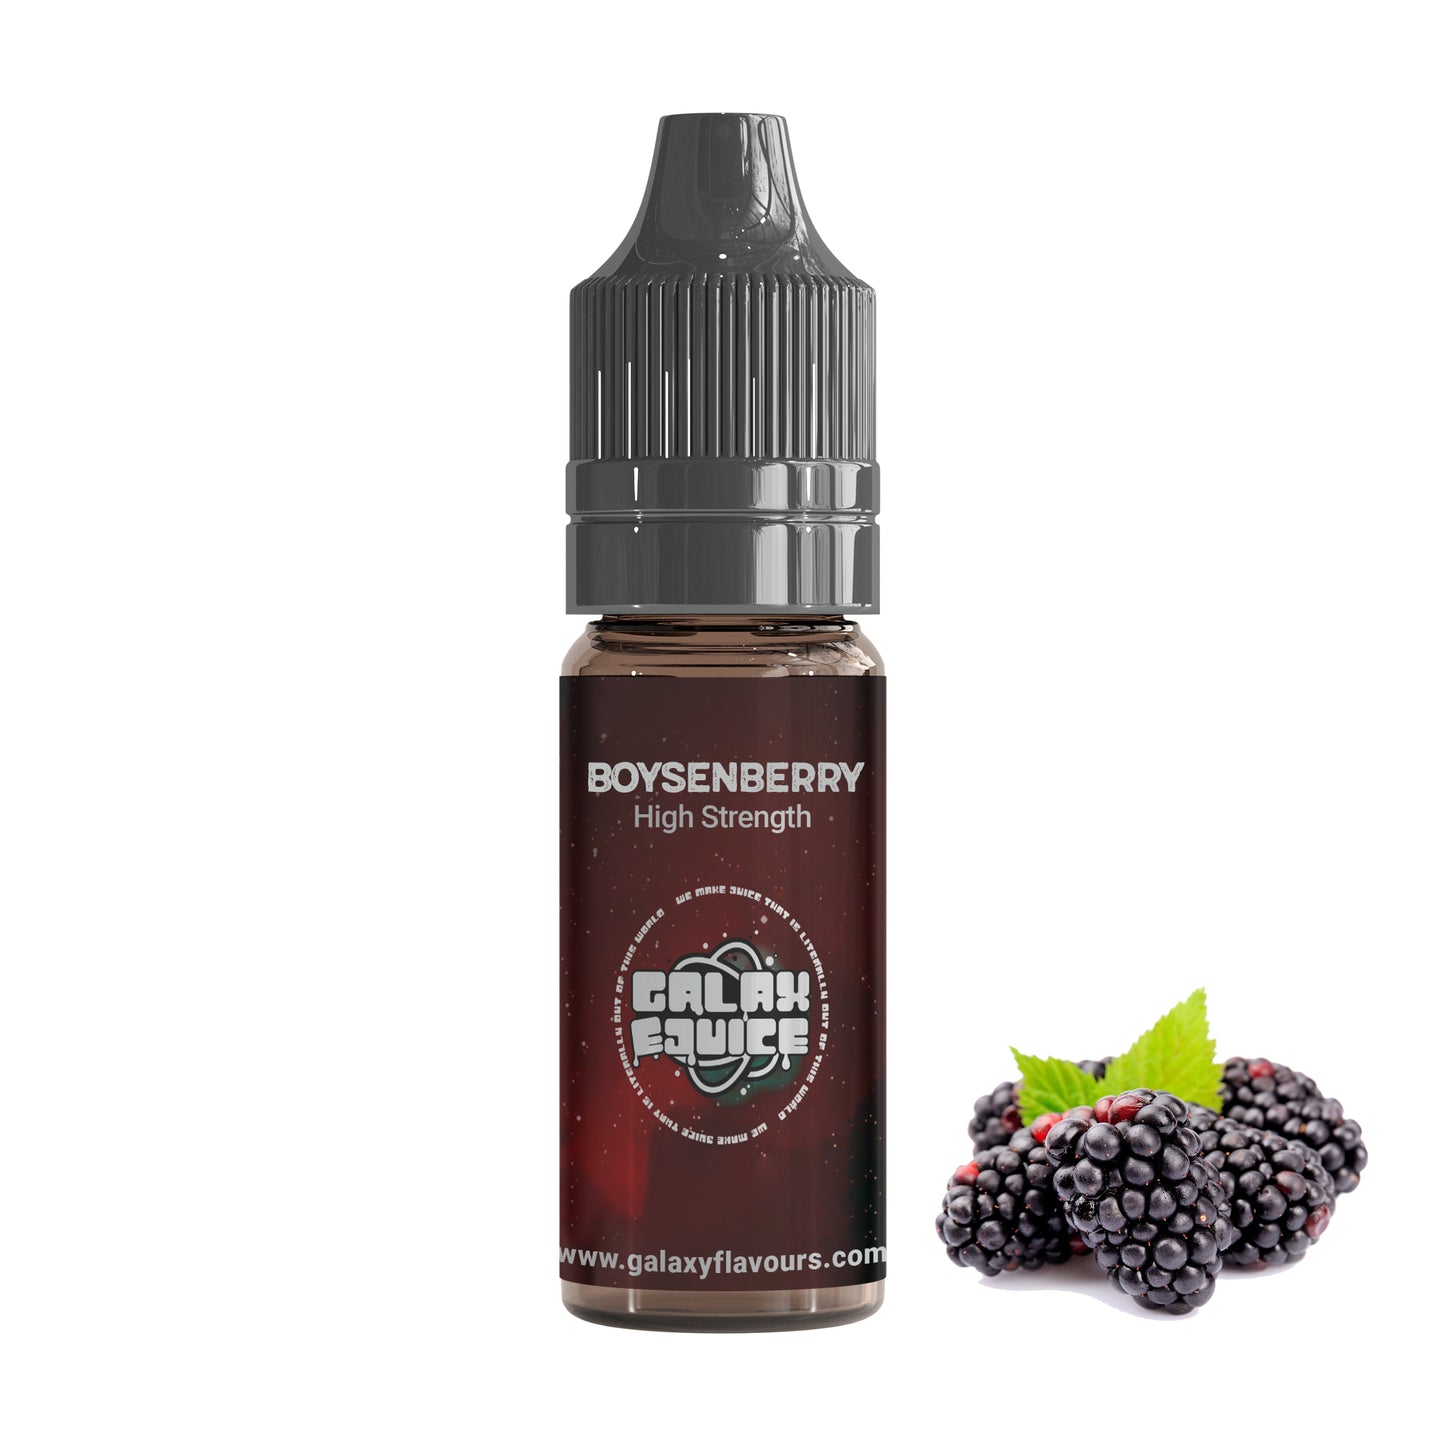 Boysenberry High Strength Professional Flavouring.